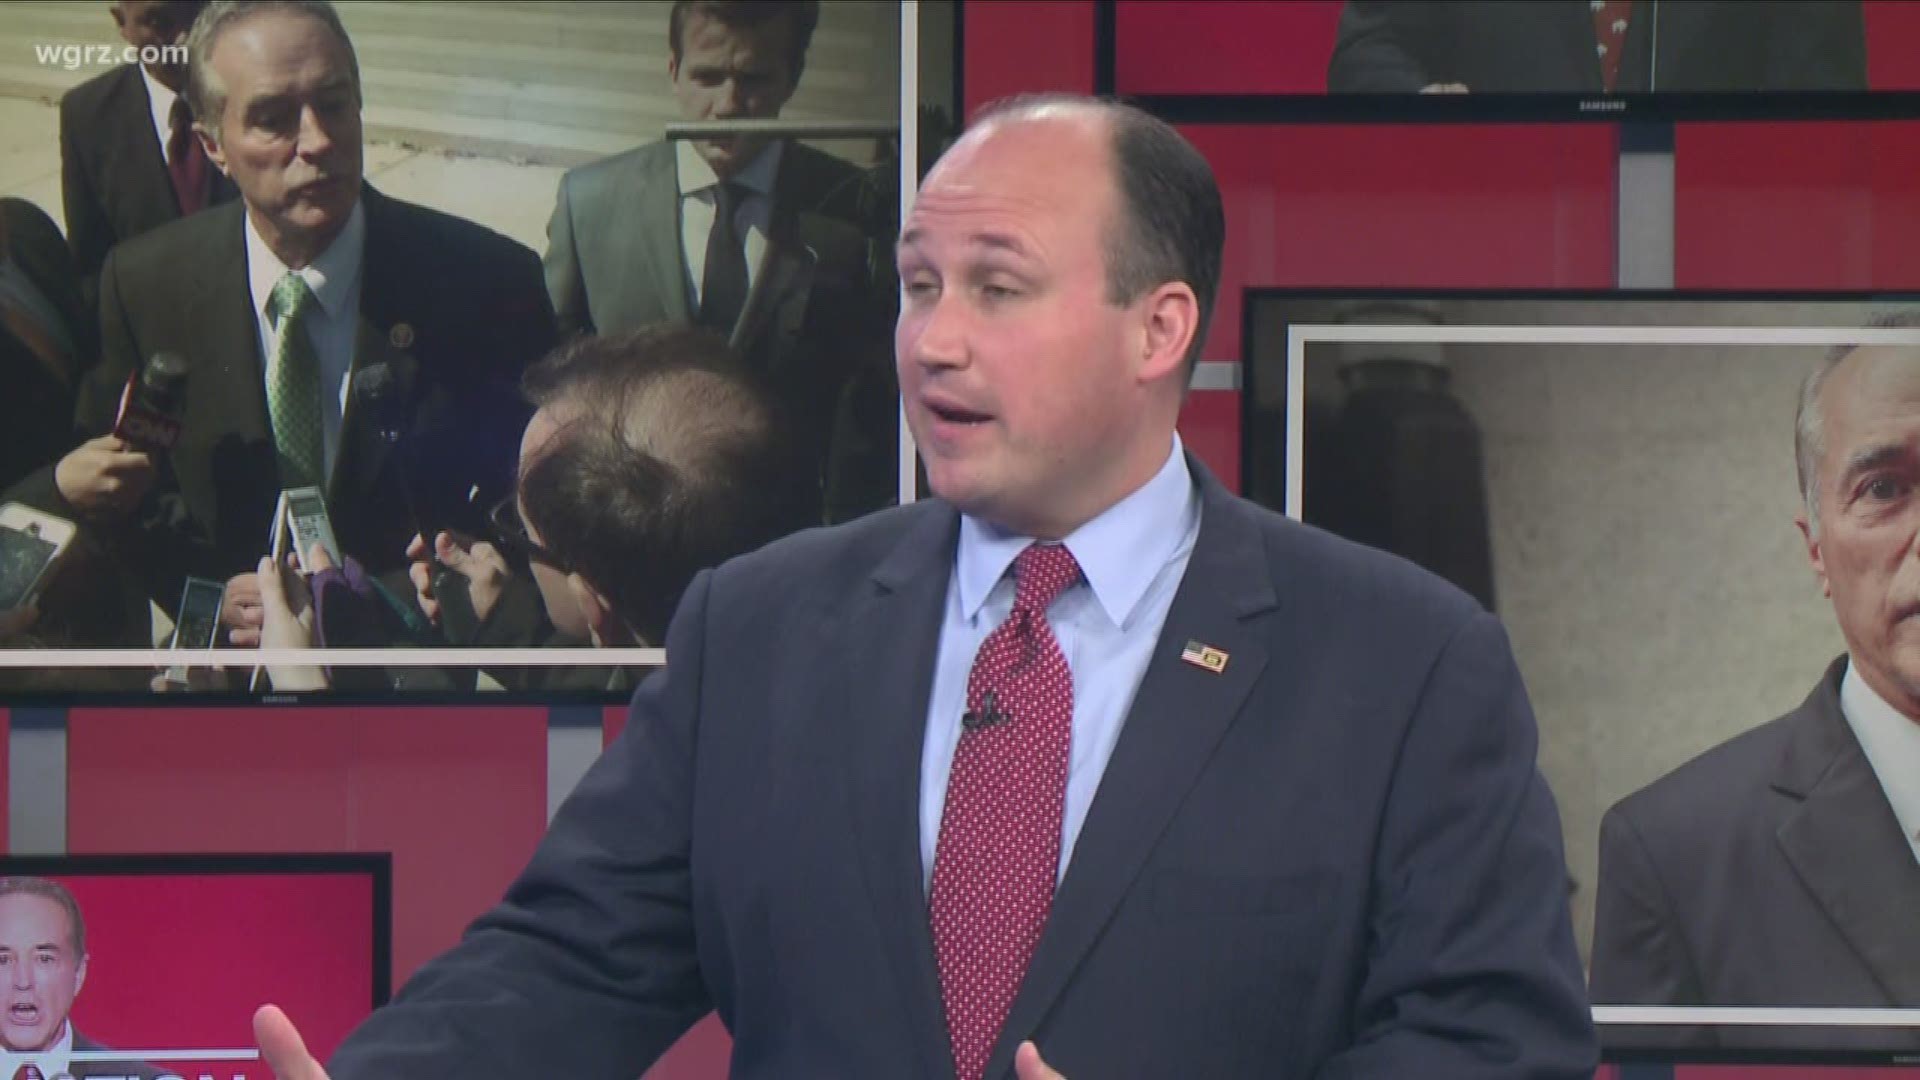 Nick Langworthy, chairman of the New York State Republican Party spoke with 2 On Your Side's Scott Levin about Chris Collins' resignation.